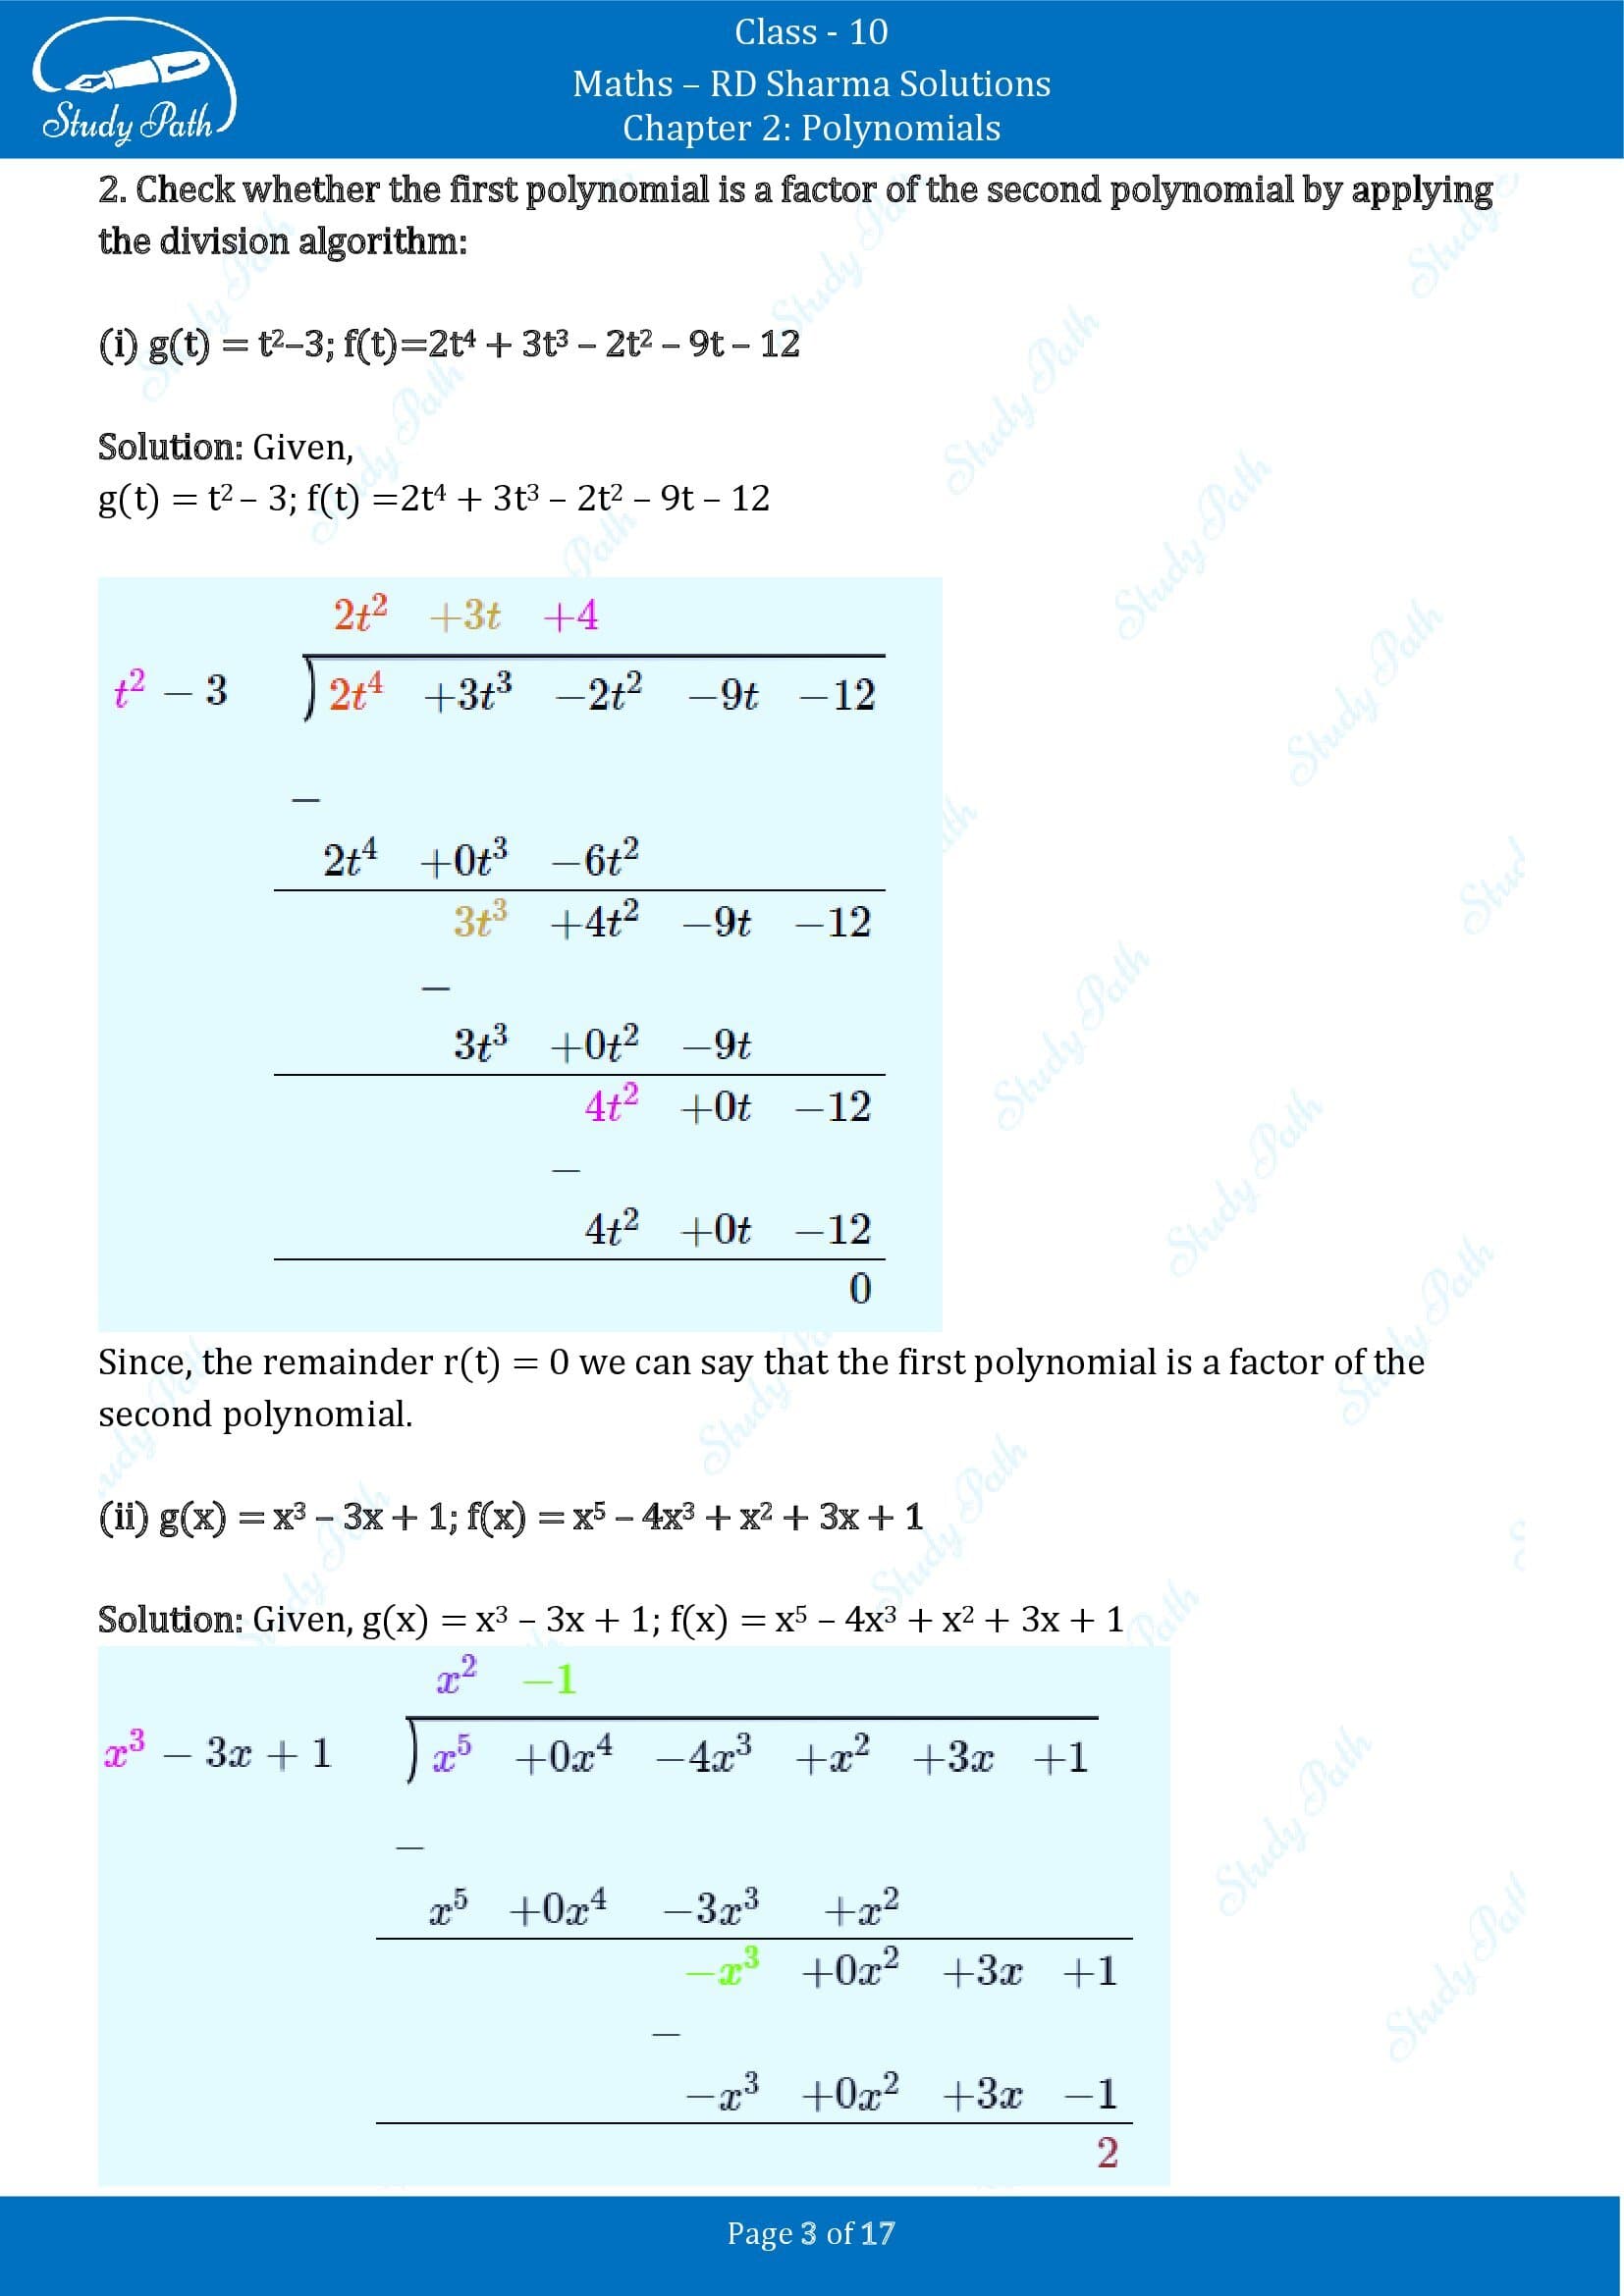 RD Sharma Solutions Class 10 Chapter 2 Polynomials Exercise 2.3 00003